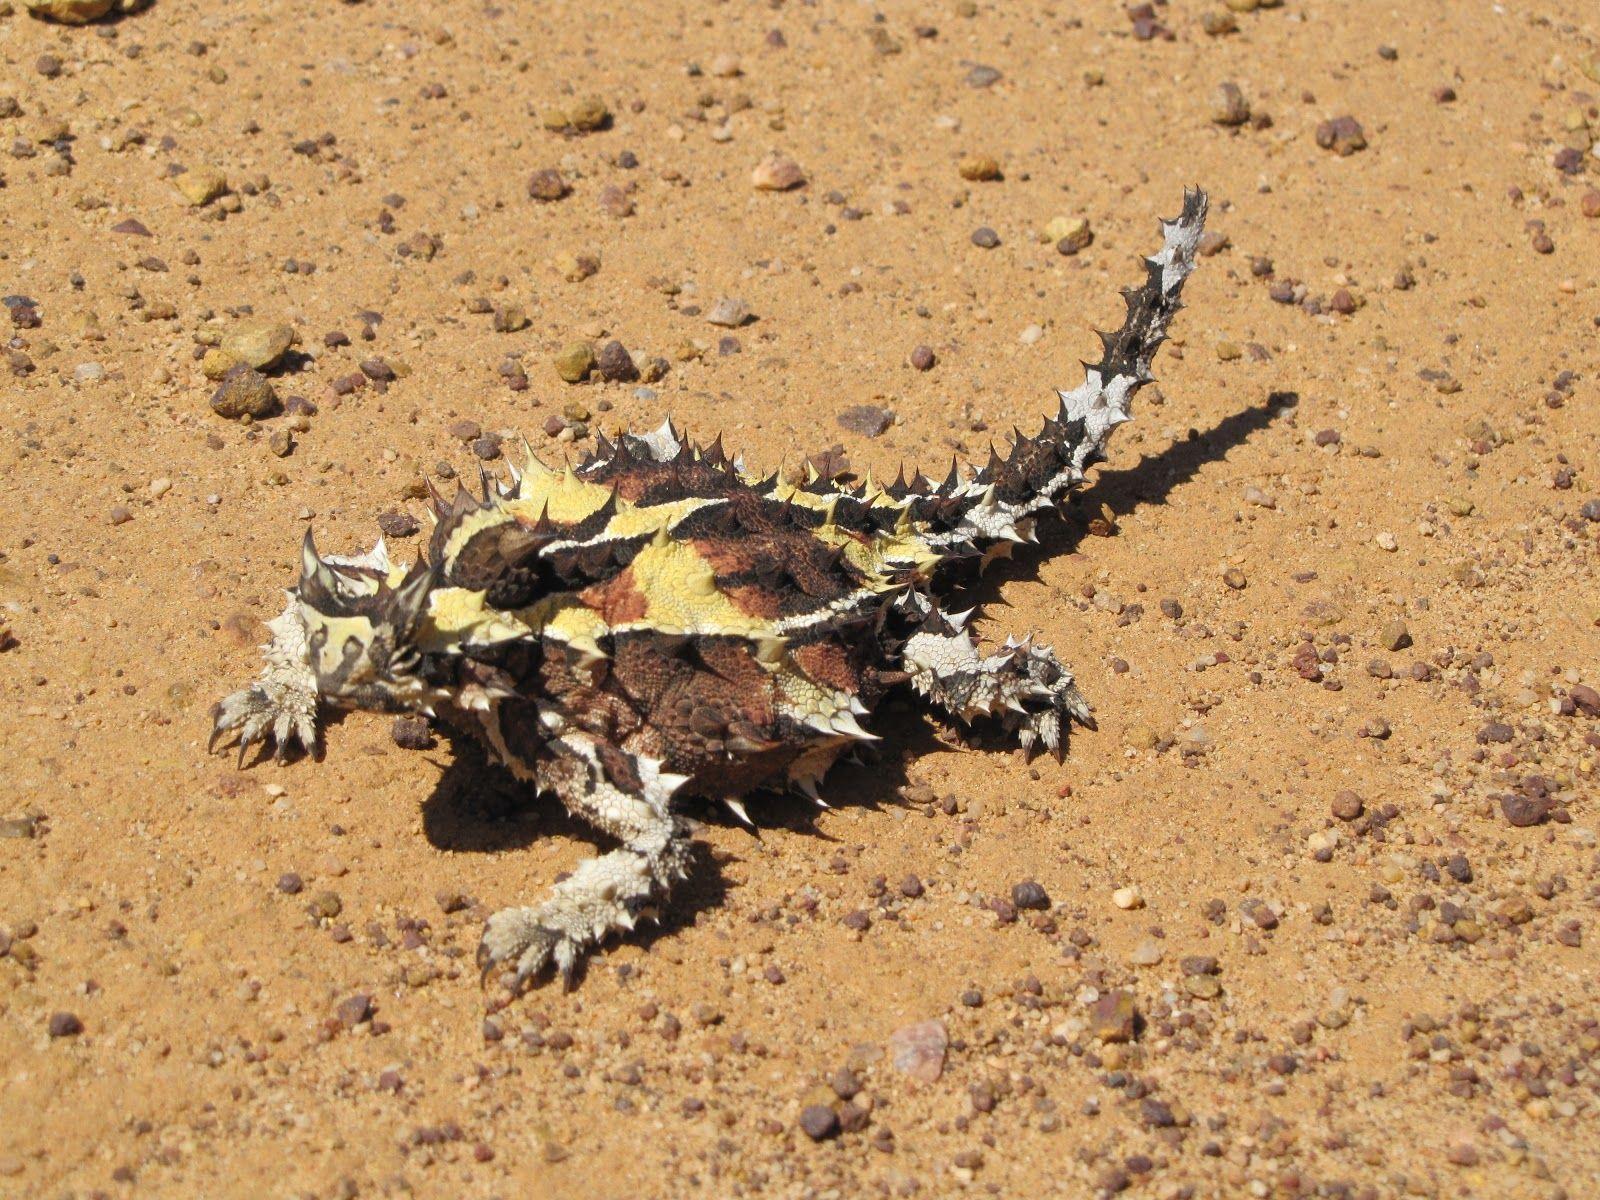 The thorny devil of western and central Australia. They look pretty